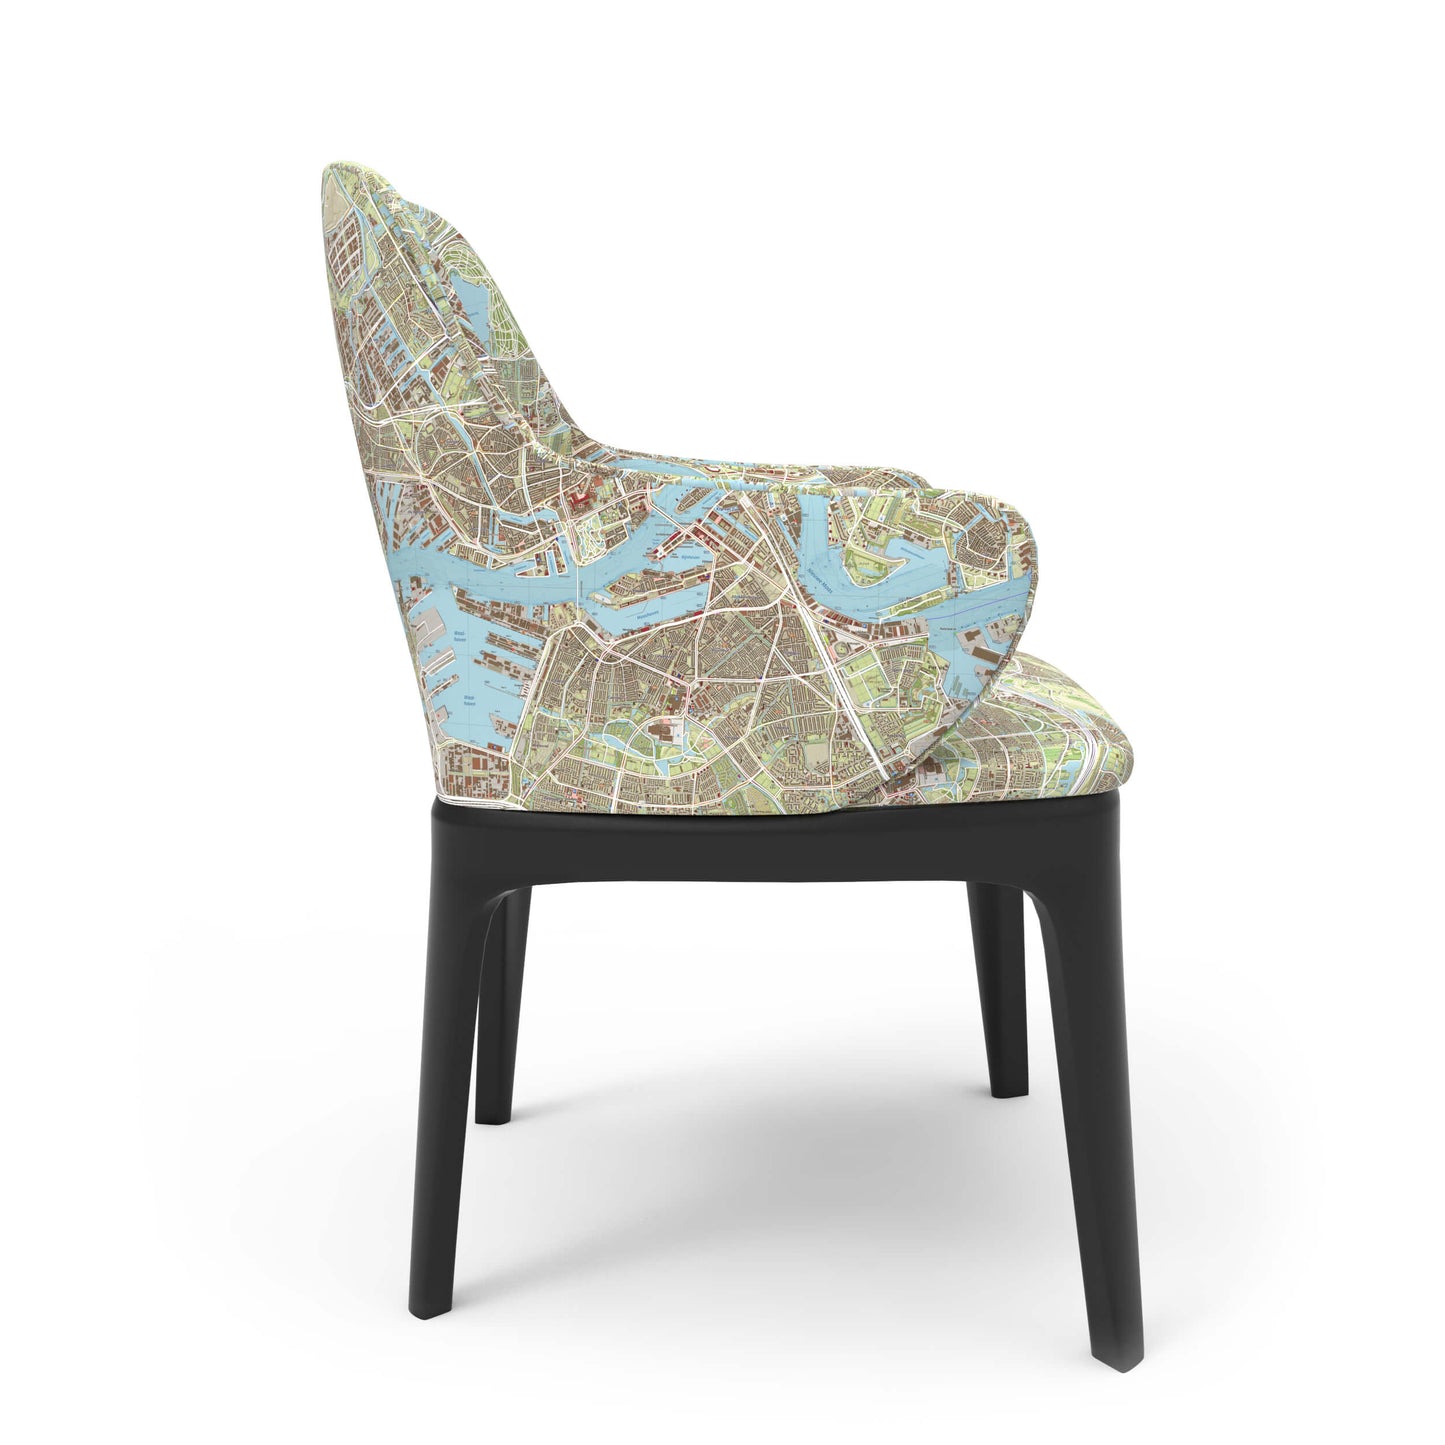 Rotterdam map dining chairs